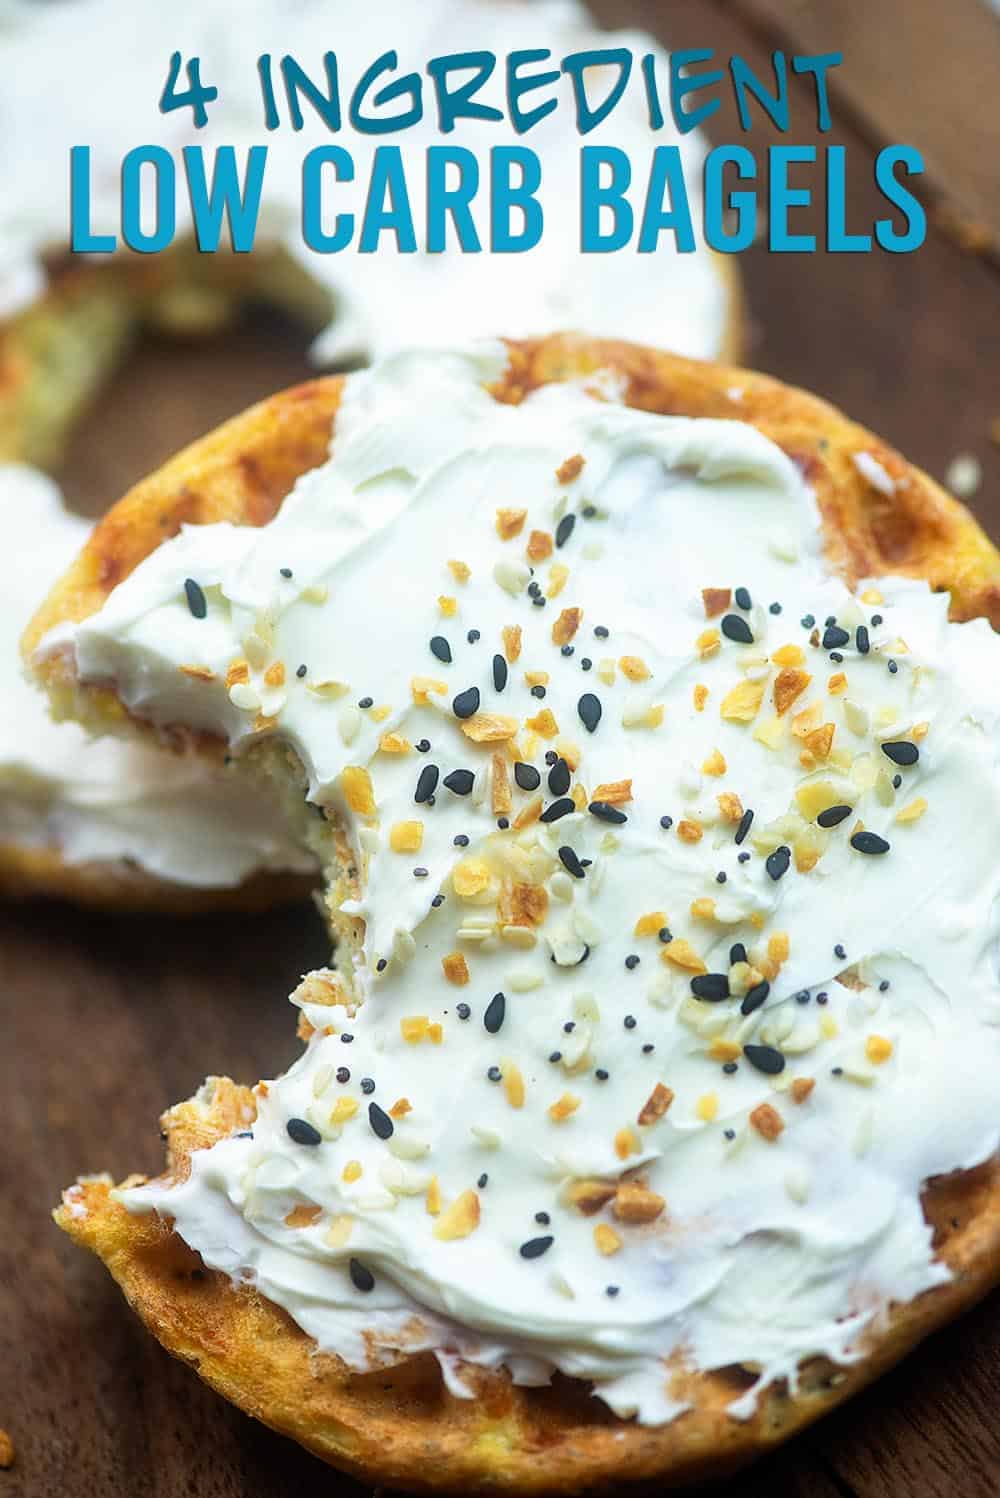 A low carb bagel topped with cream cheese and seasoning with a bite taken out of it.